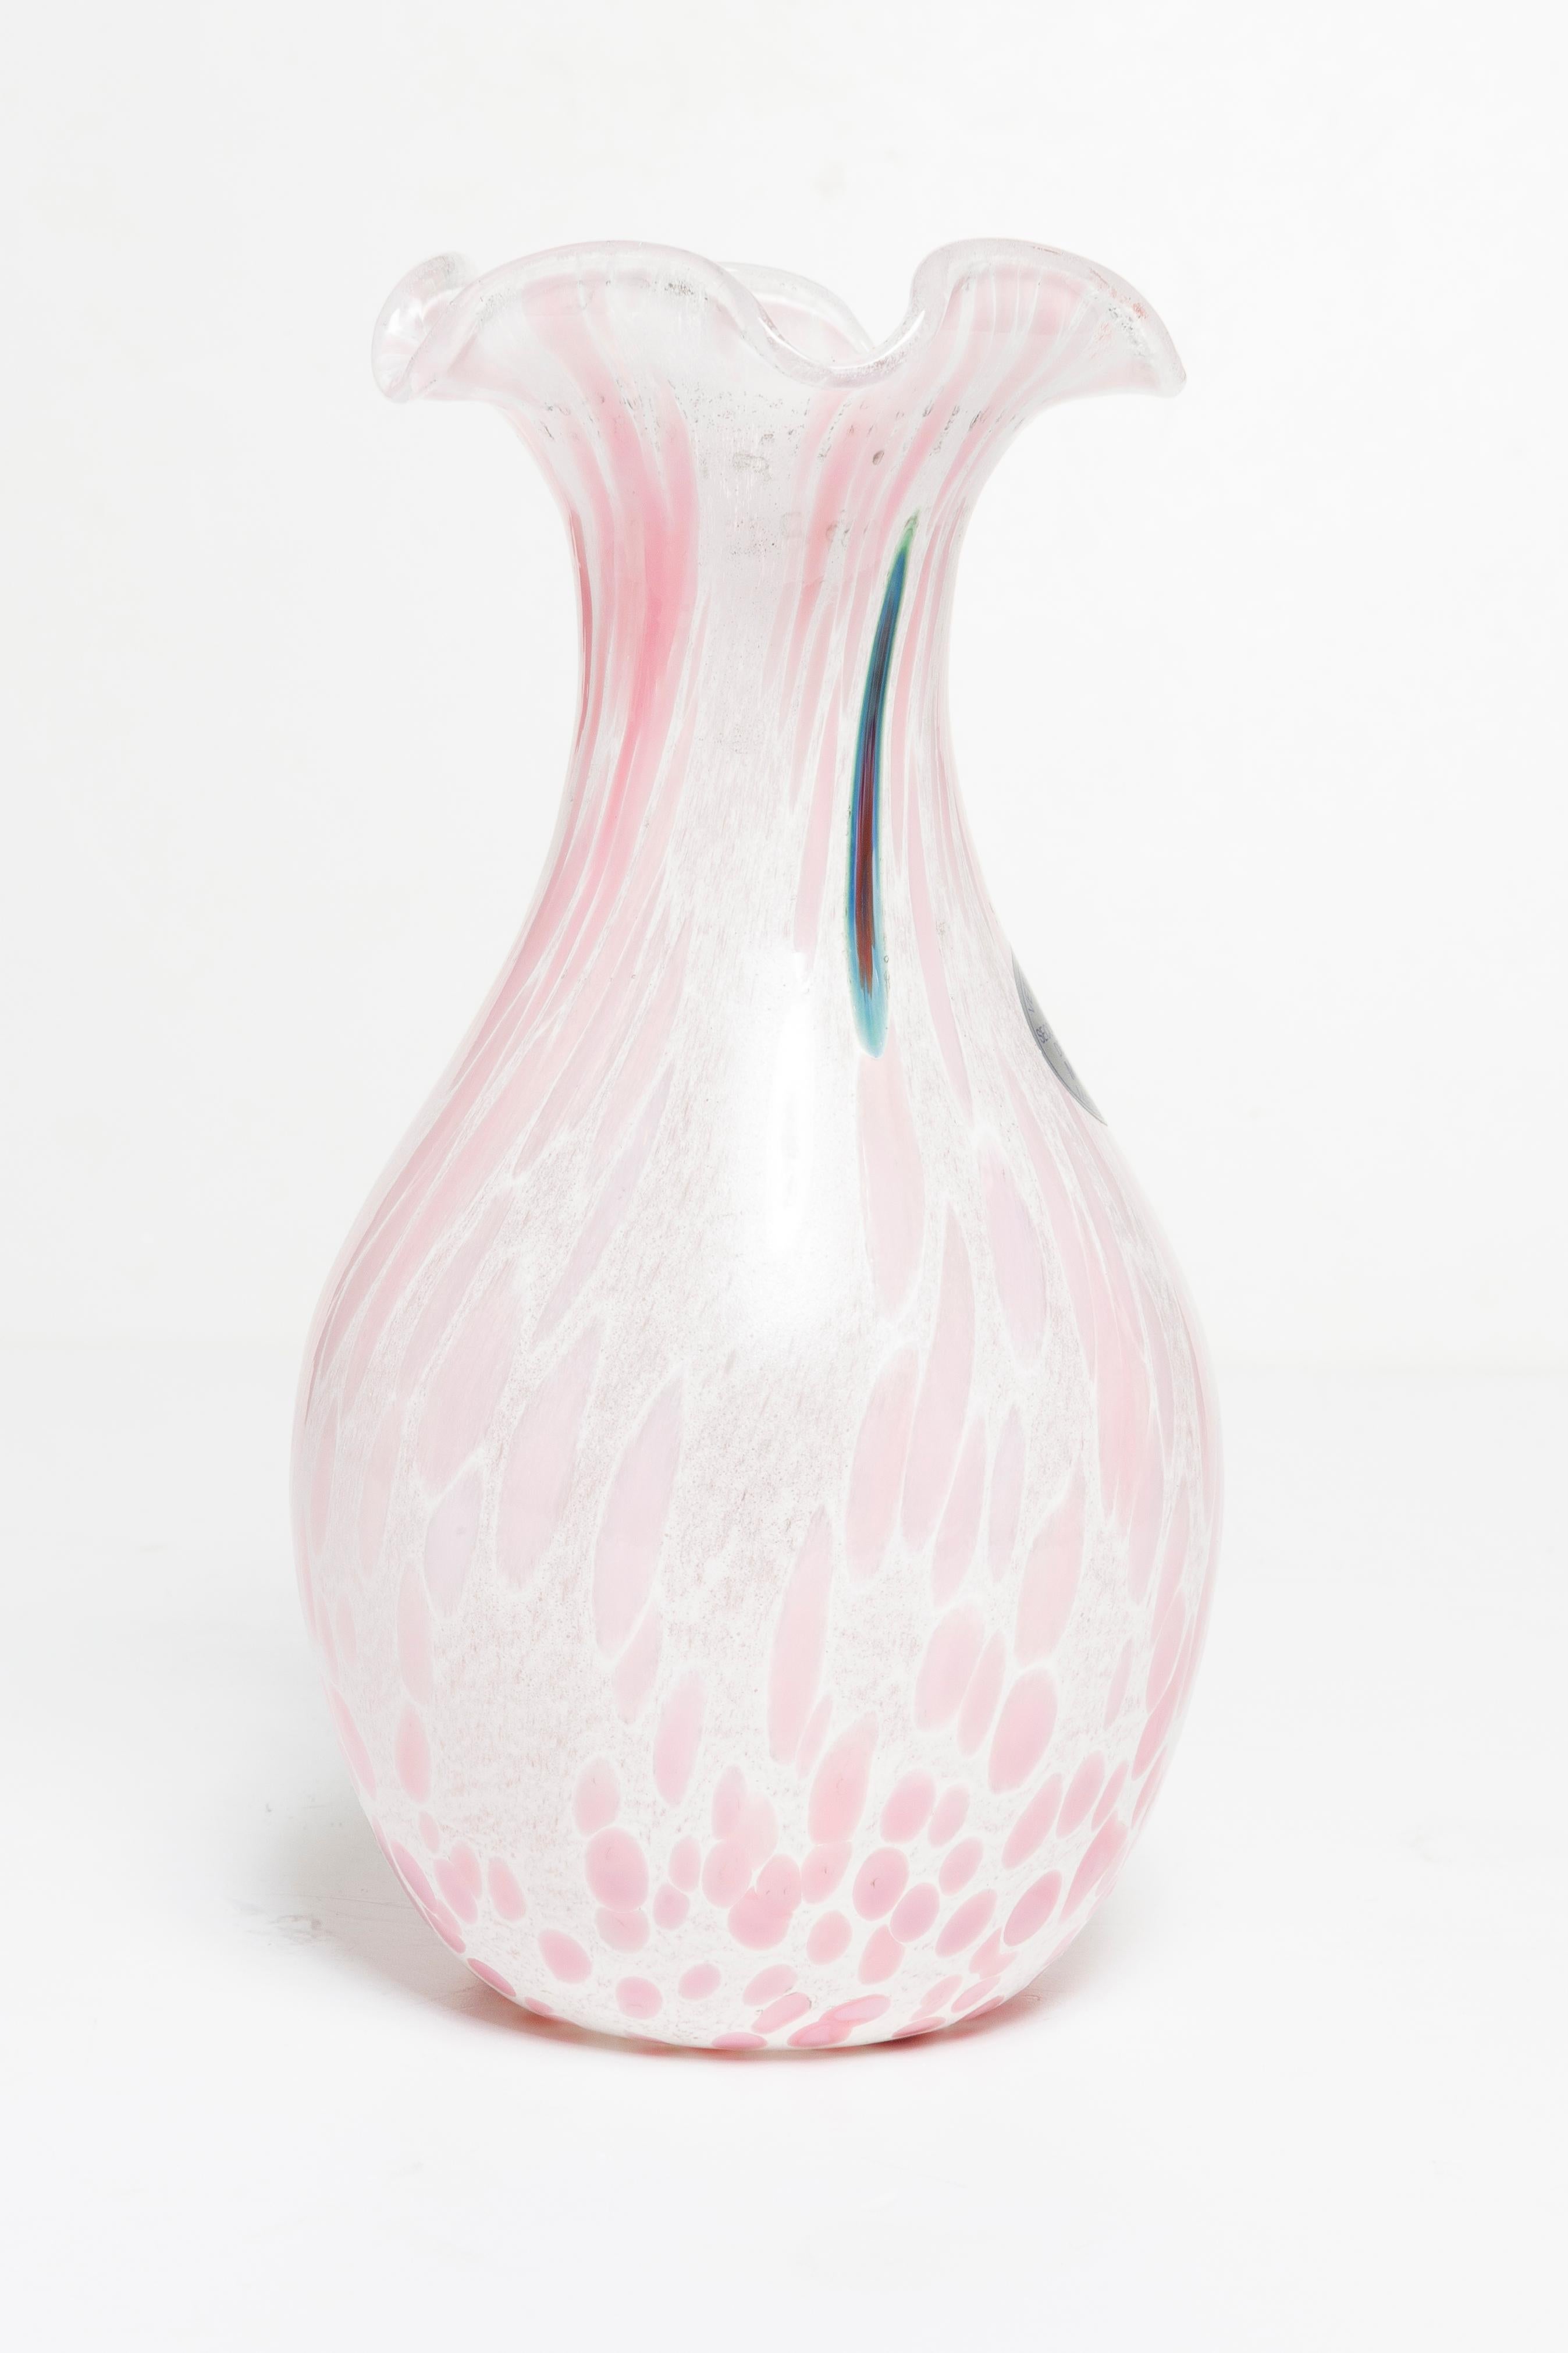 Italian Mid Century Vintage White and Pink Dots Murano Vase, Italy, 1960s For Sale